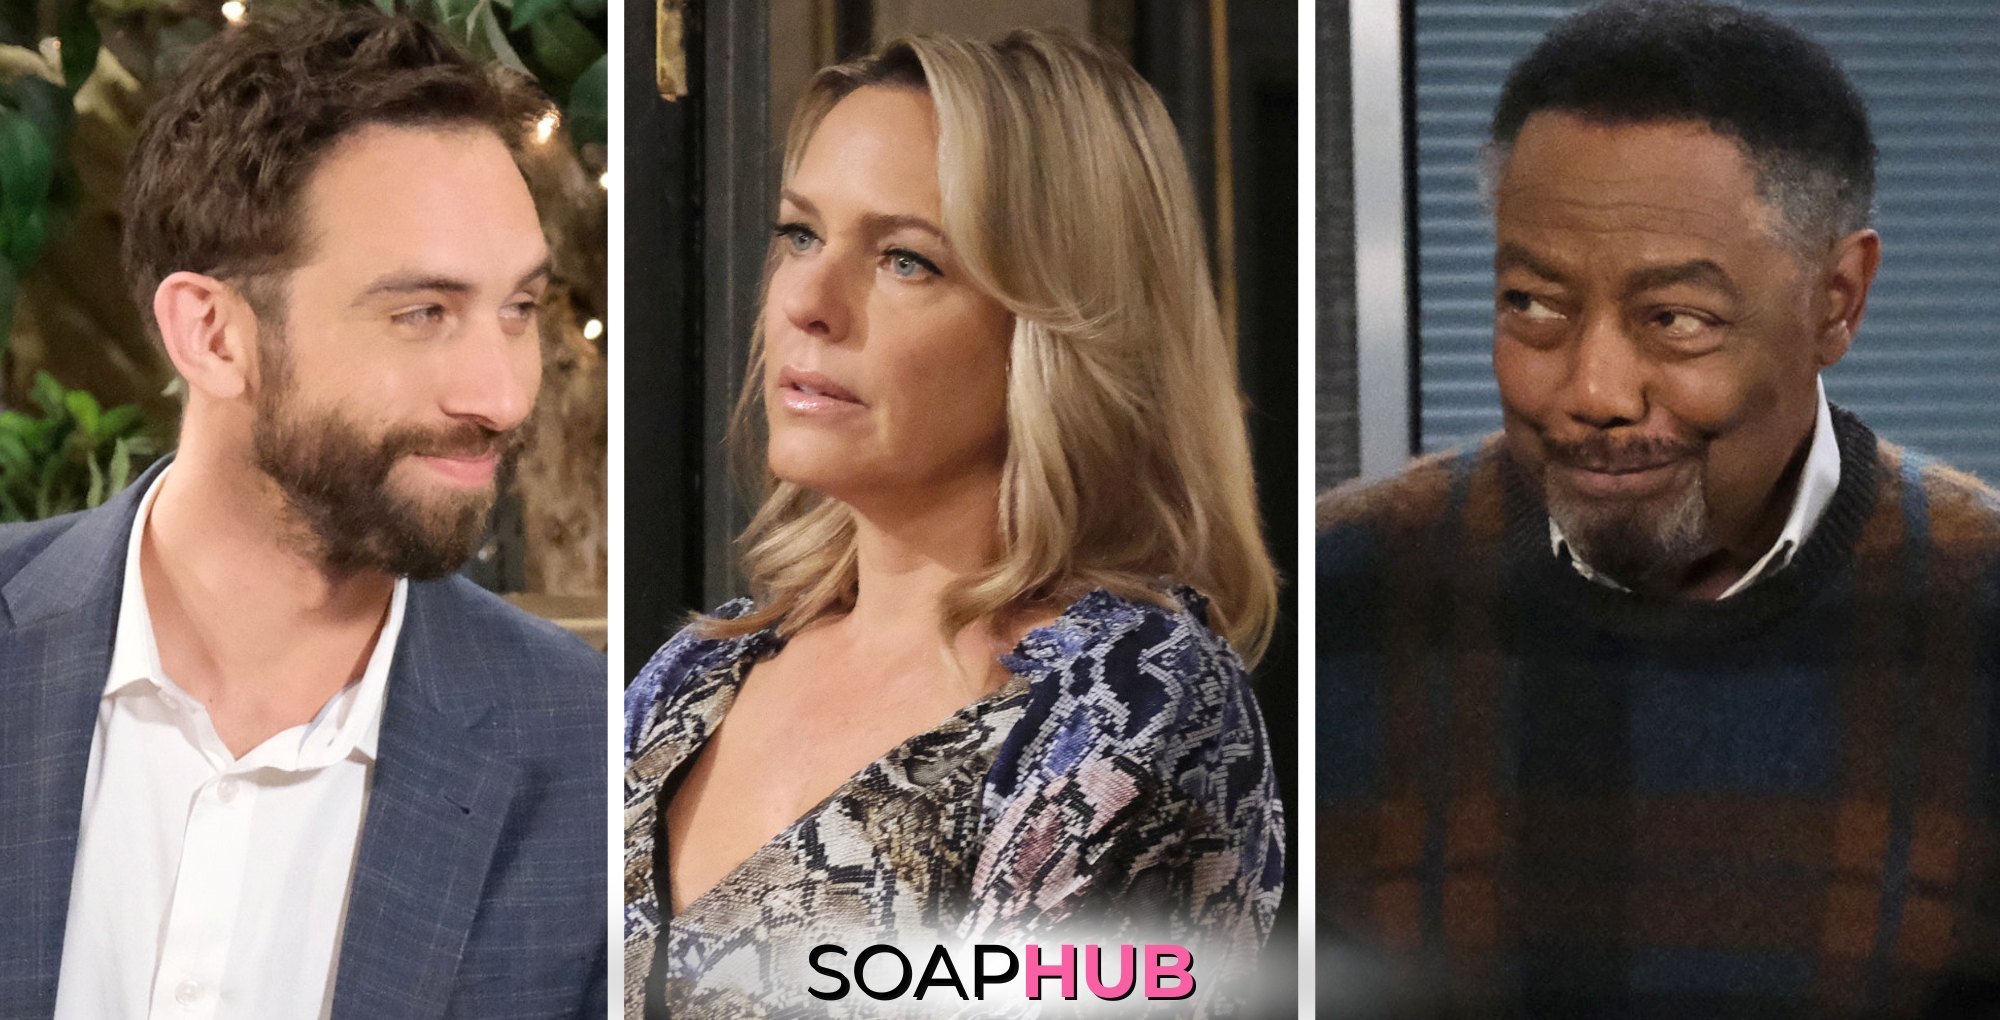 Everett, Nicole, and Abe featured for Days of Our Lives two week spoilers for April 8 - April 19, 2024 with the Soap Hub logo across the bottom.